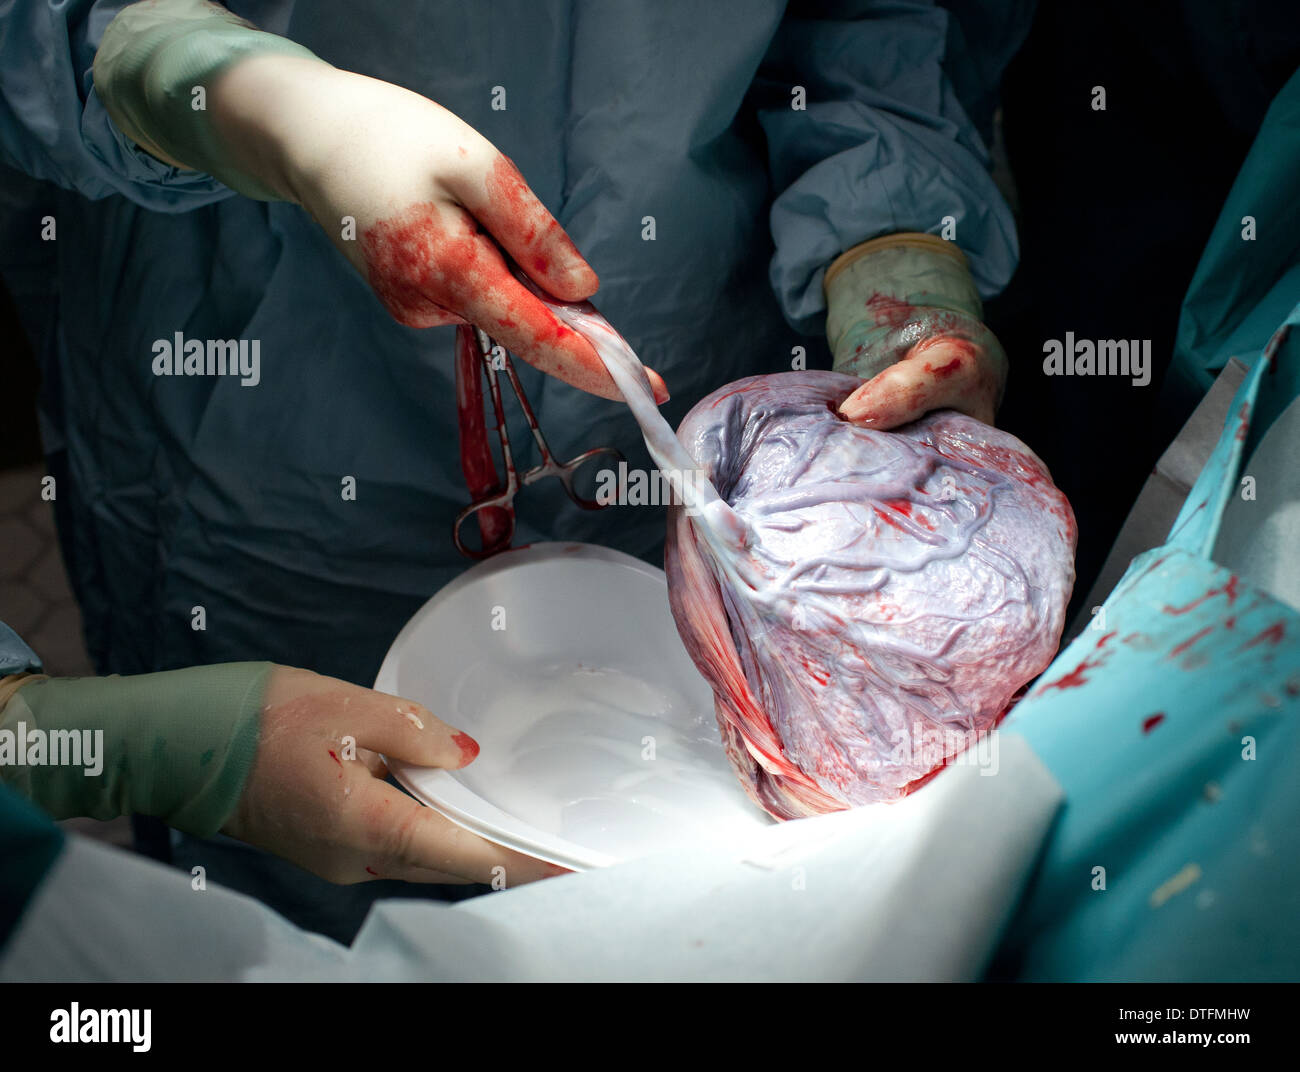 Human placenta and umbilical cord being removed after childbirth Stock Photo